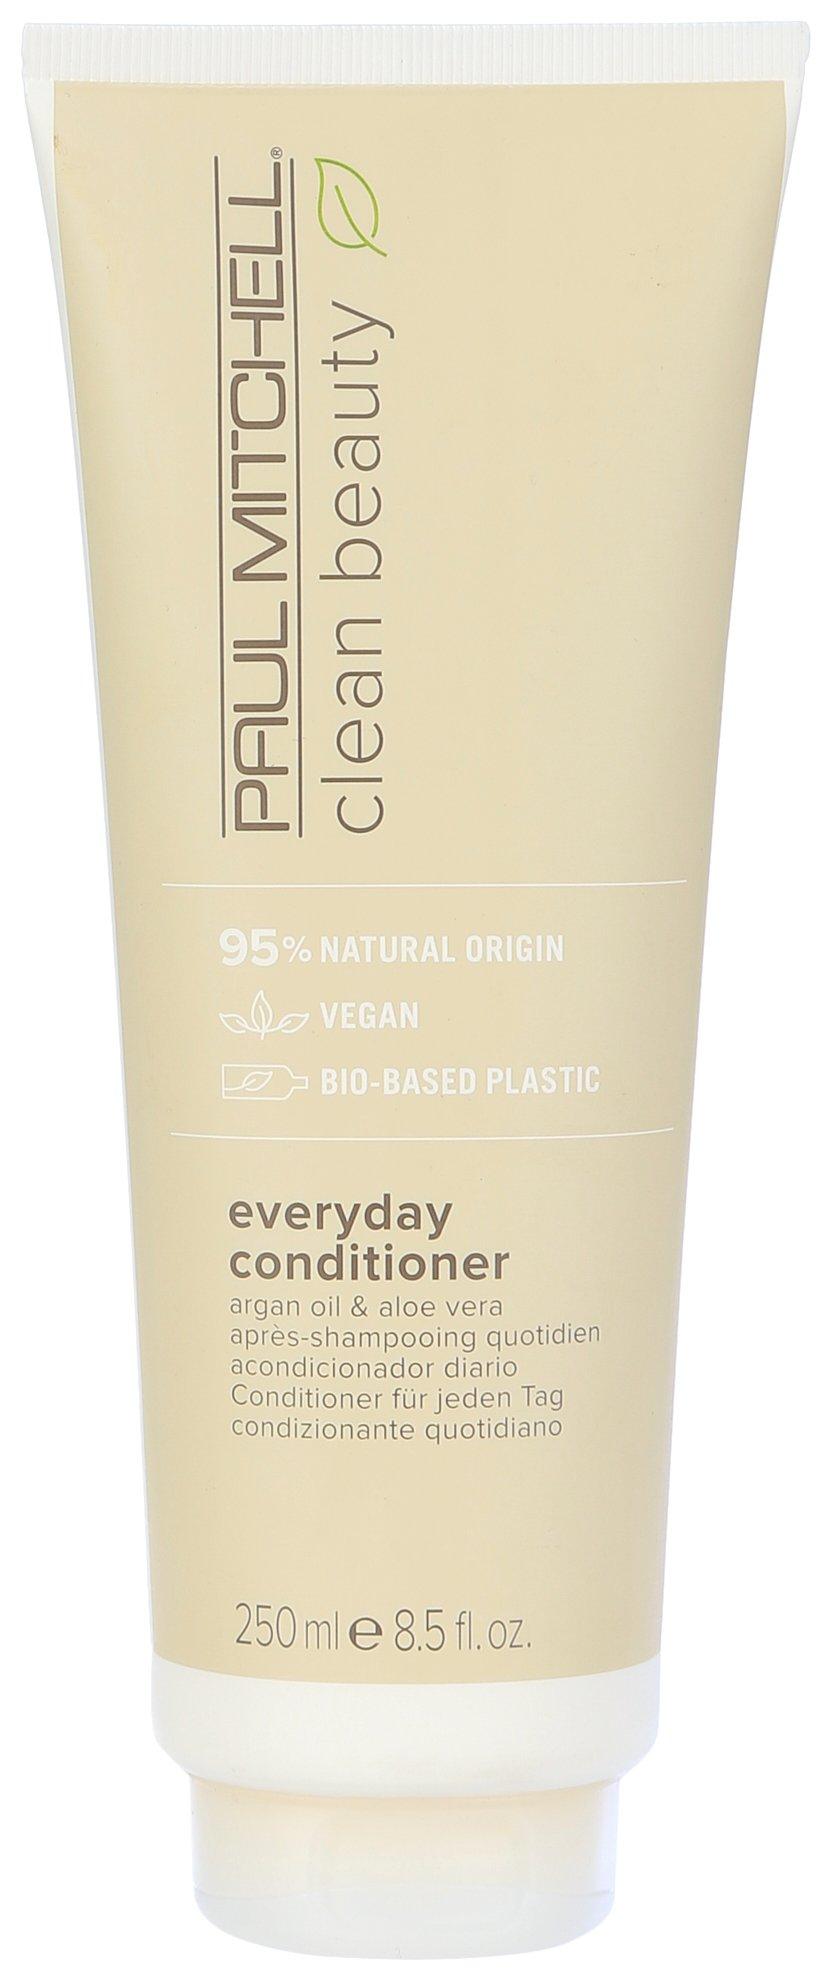 8.5 Fl.Oz. Clean Beauty Everyday Conditioner